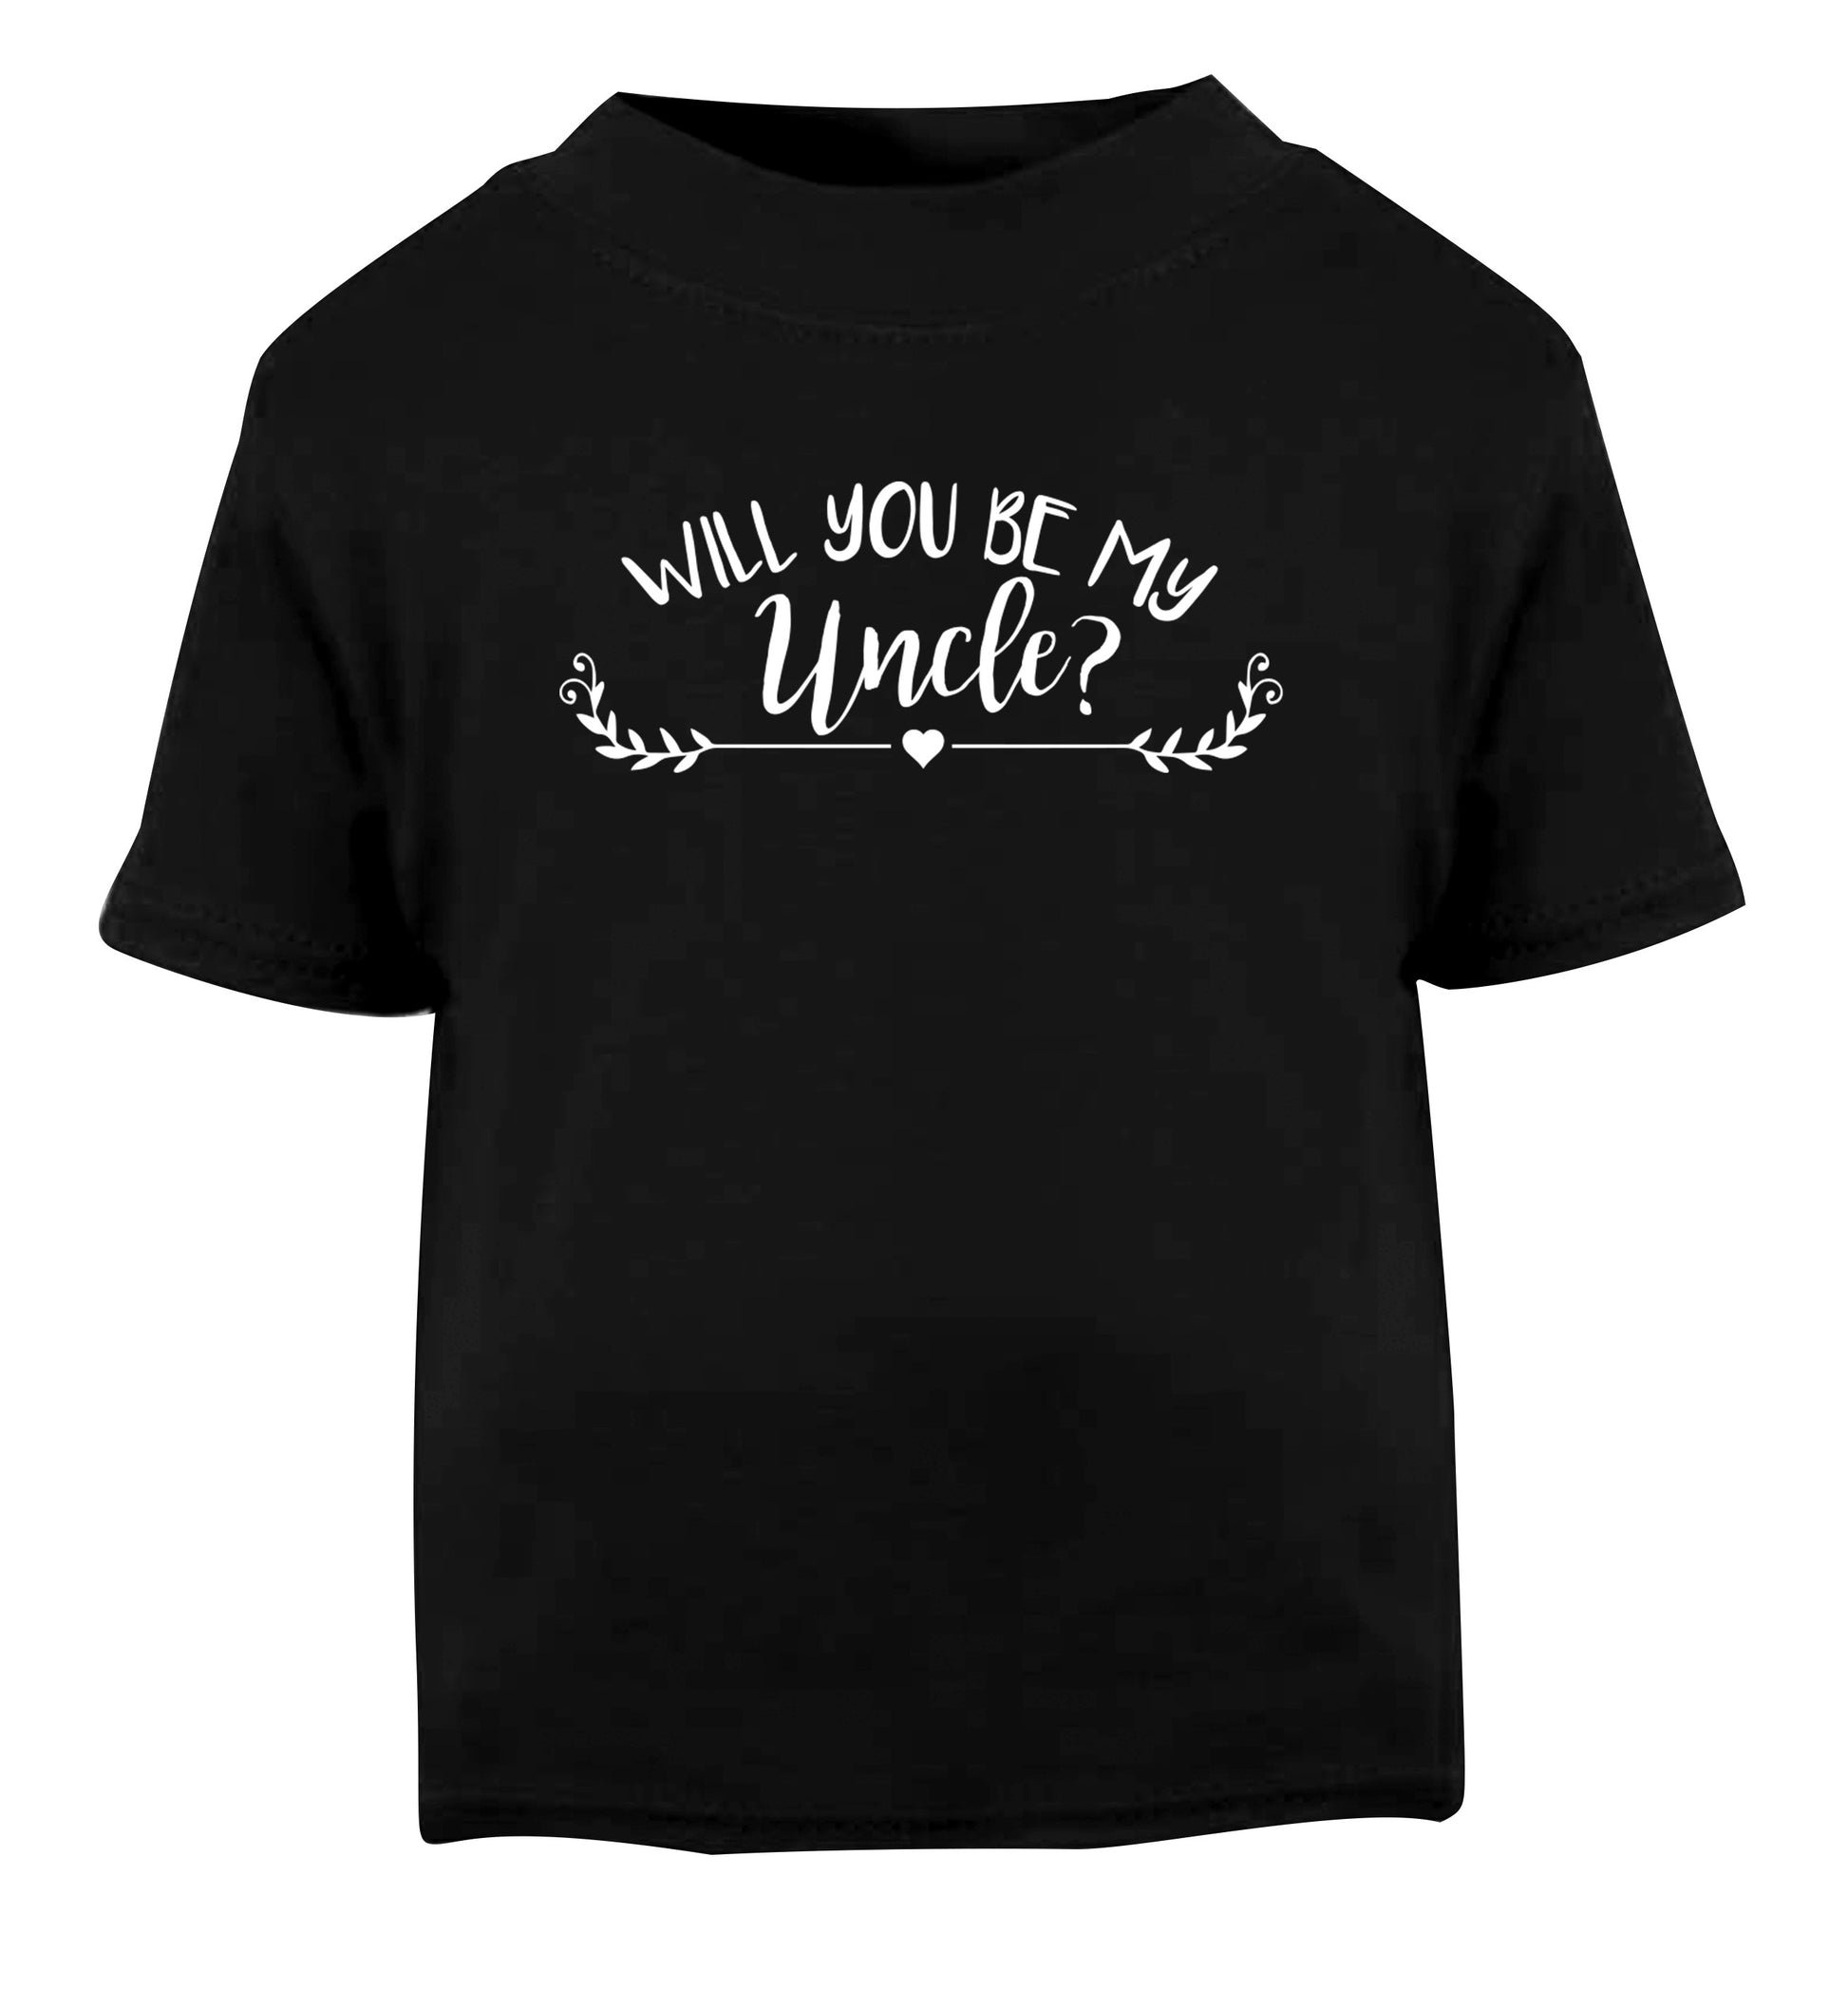 Will you be my uncle? Black Baby Toddler Tshirt 2 years